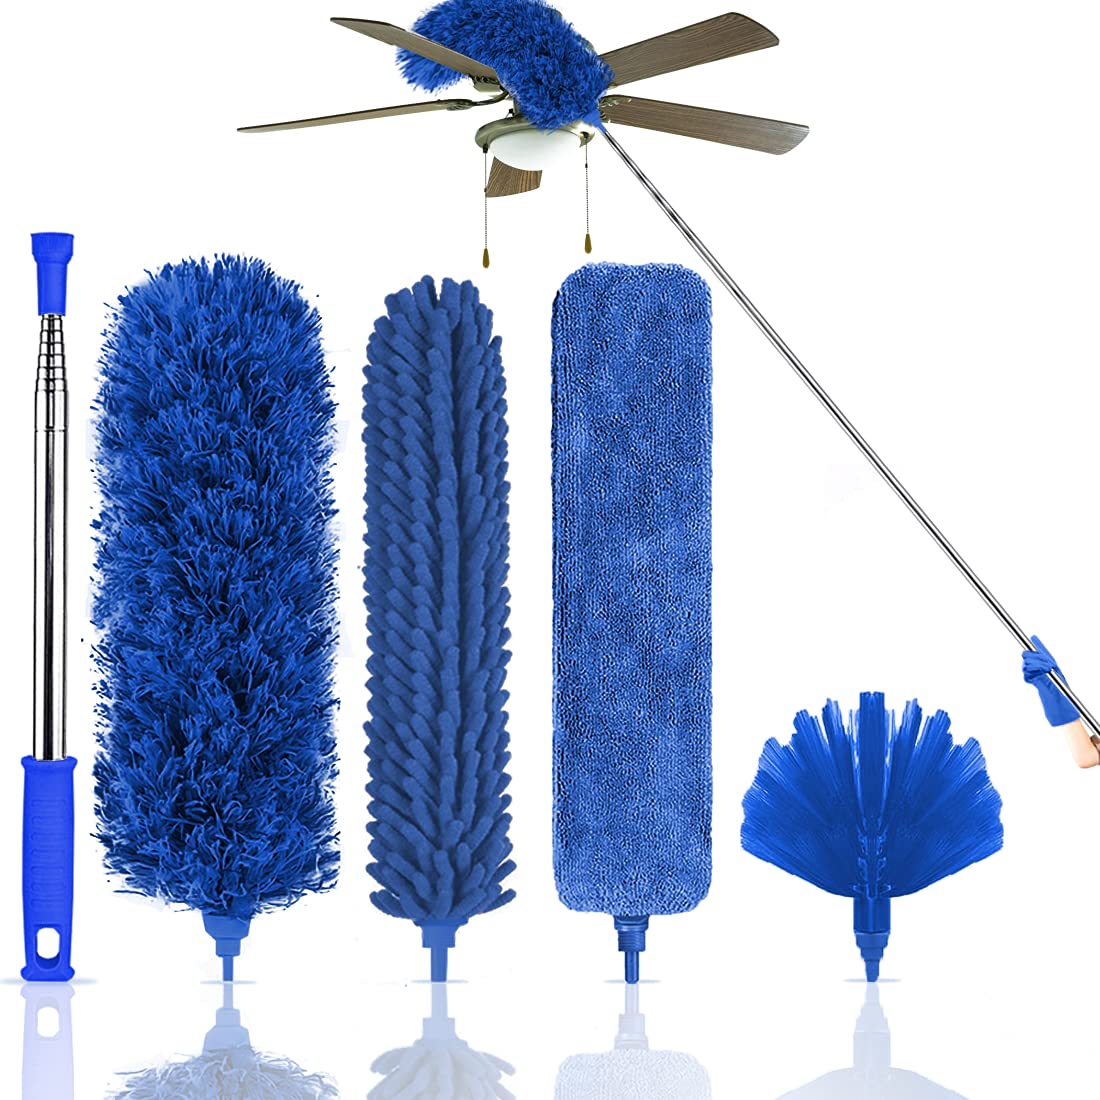 Flexible Fan Dusting Brush, Flexible Fan Dusting Brush (Non-disassembly  Cleaning),Bendable Dusting Brush, Microfiber Dust Collector, Electric Fan